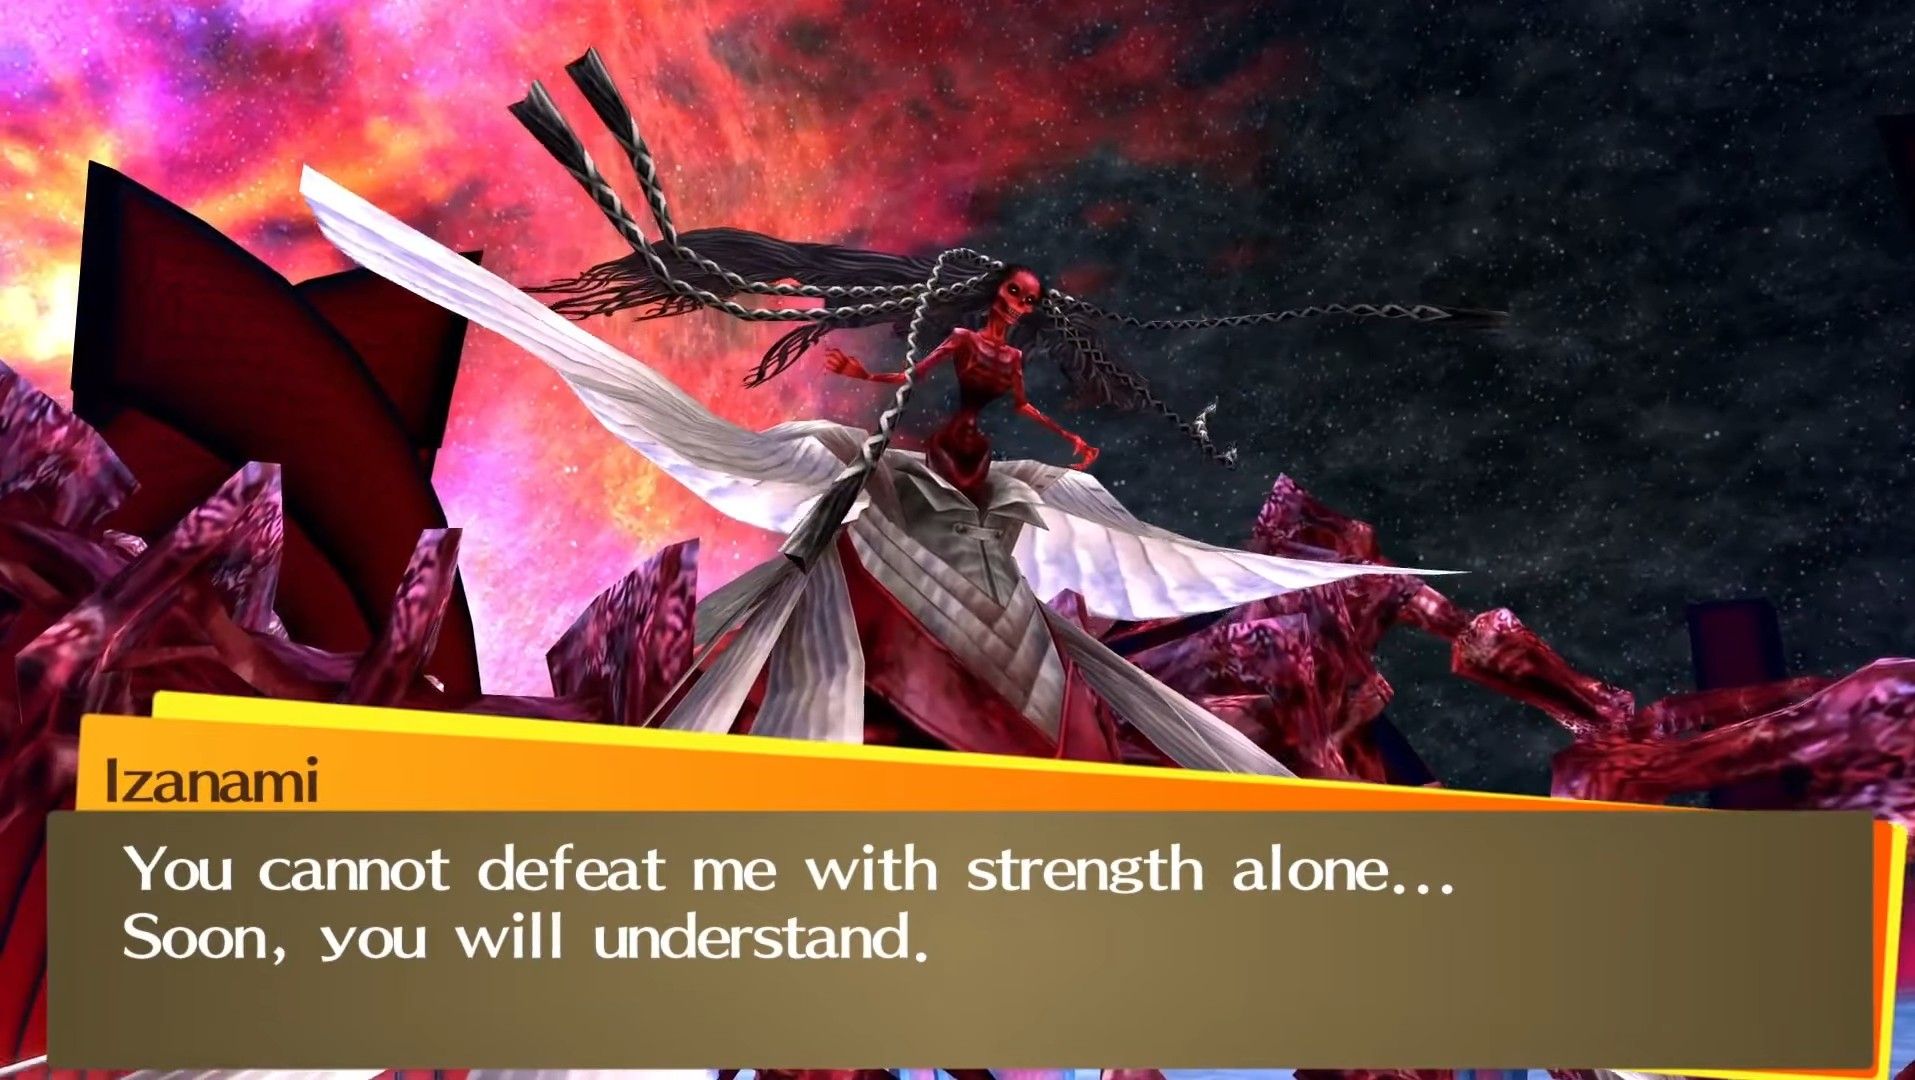 izanami-no-okami taunting the investigation team during the boss battle of persona 4 golden